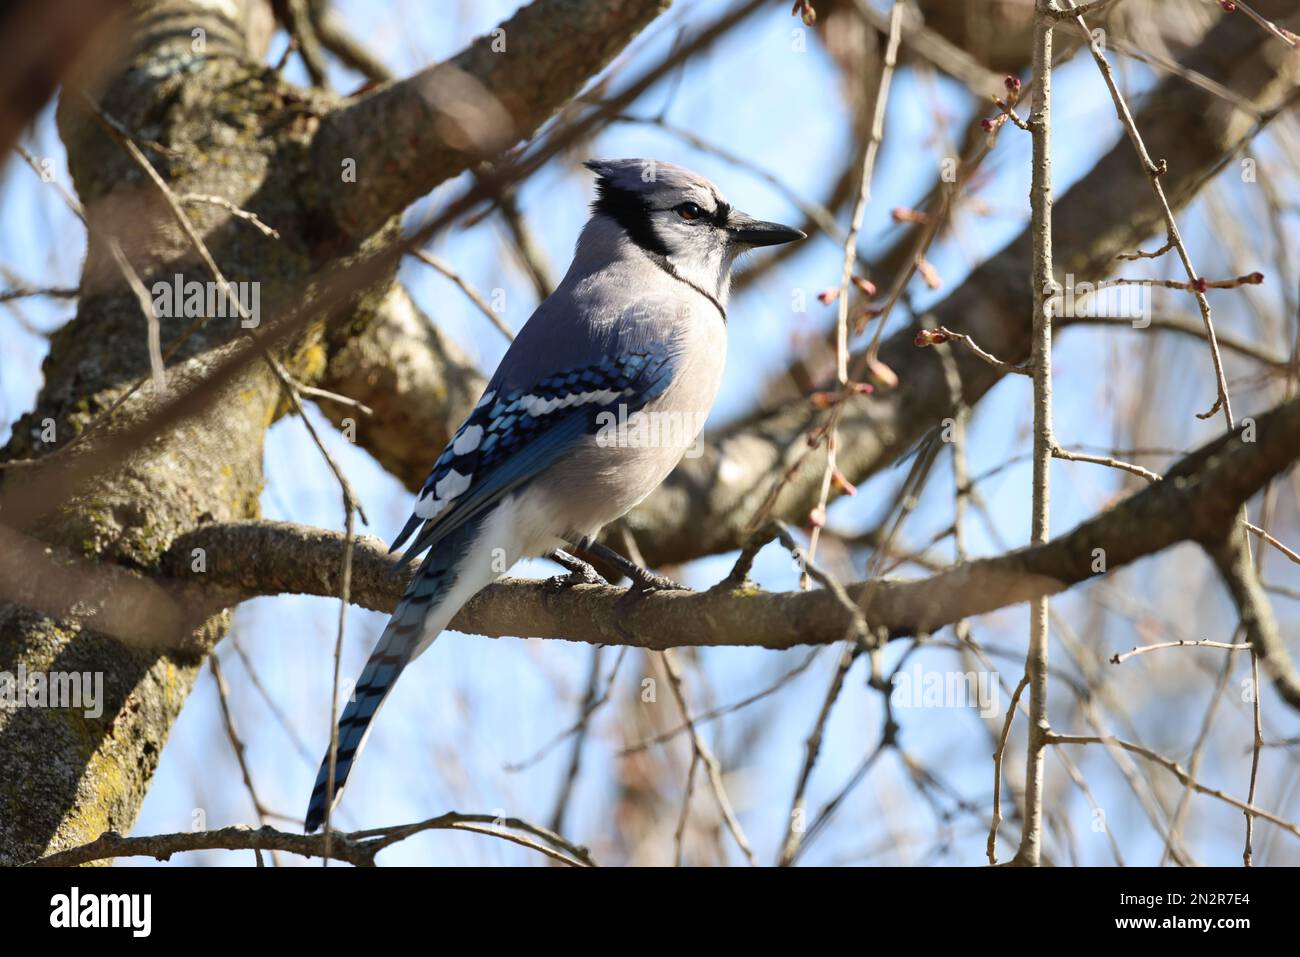 A closeup shot of a Blue jay perched on a tree Stock Photo